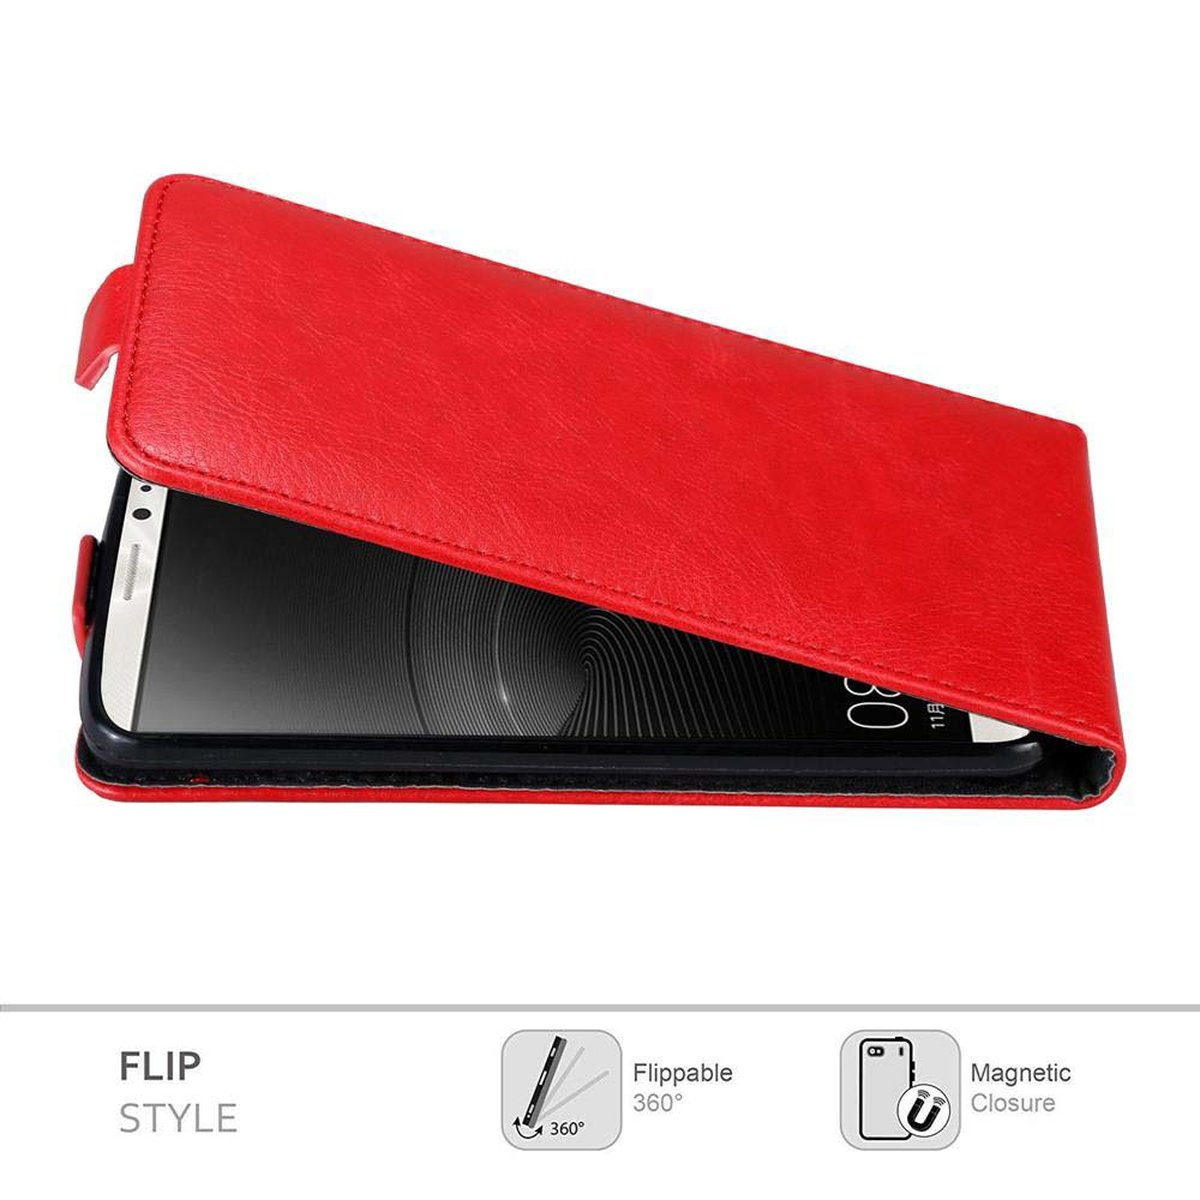 Flip Hülle MATE Flip CADORABO Huawei, APFEL Style, ROT Cover, im 8,